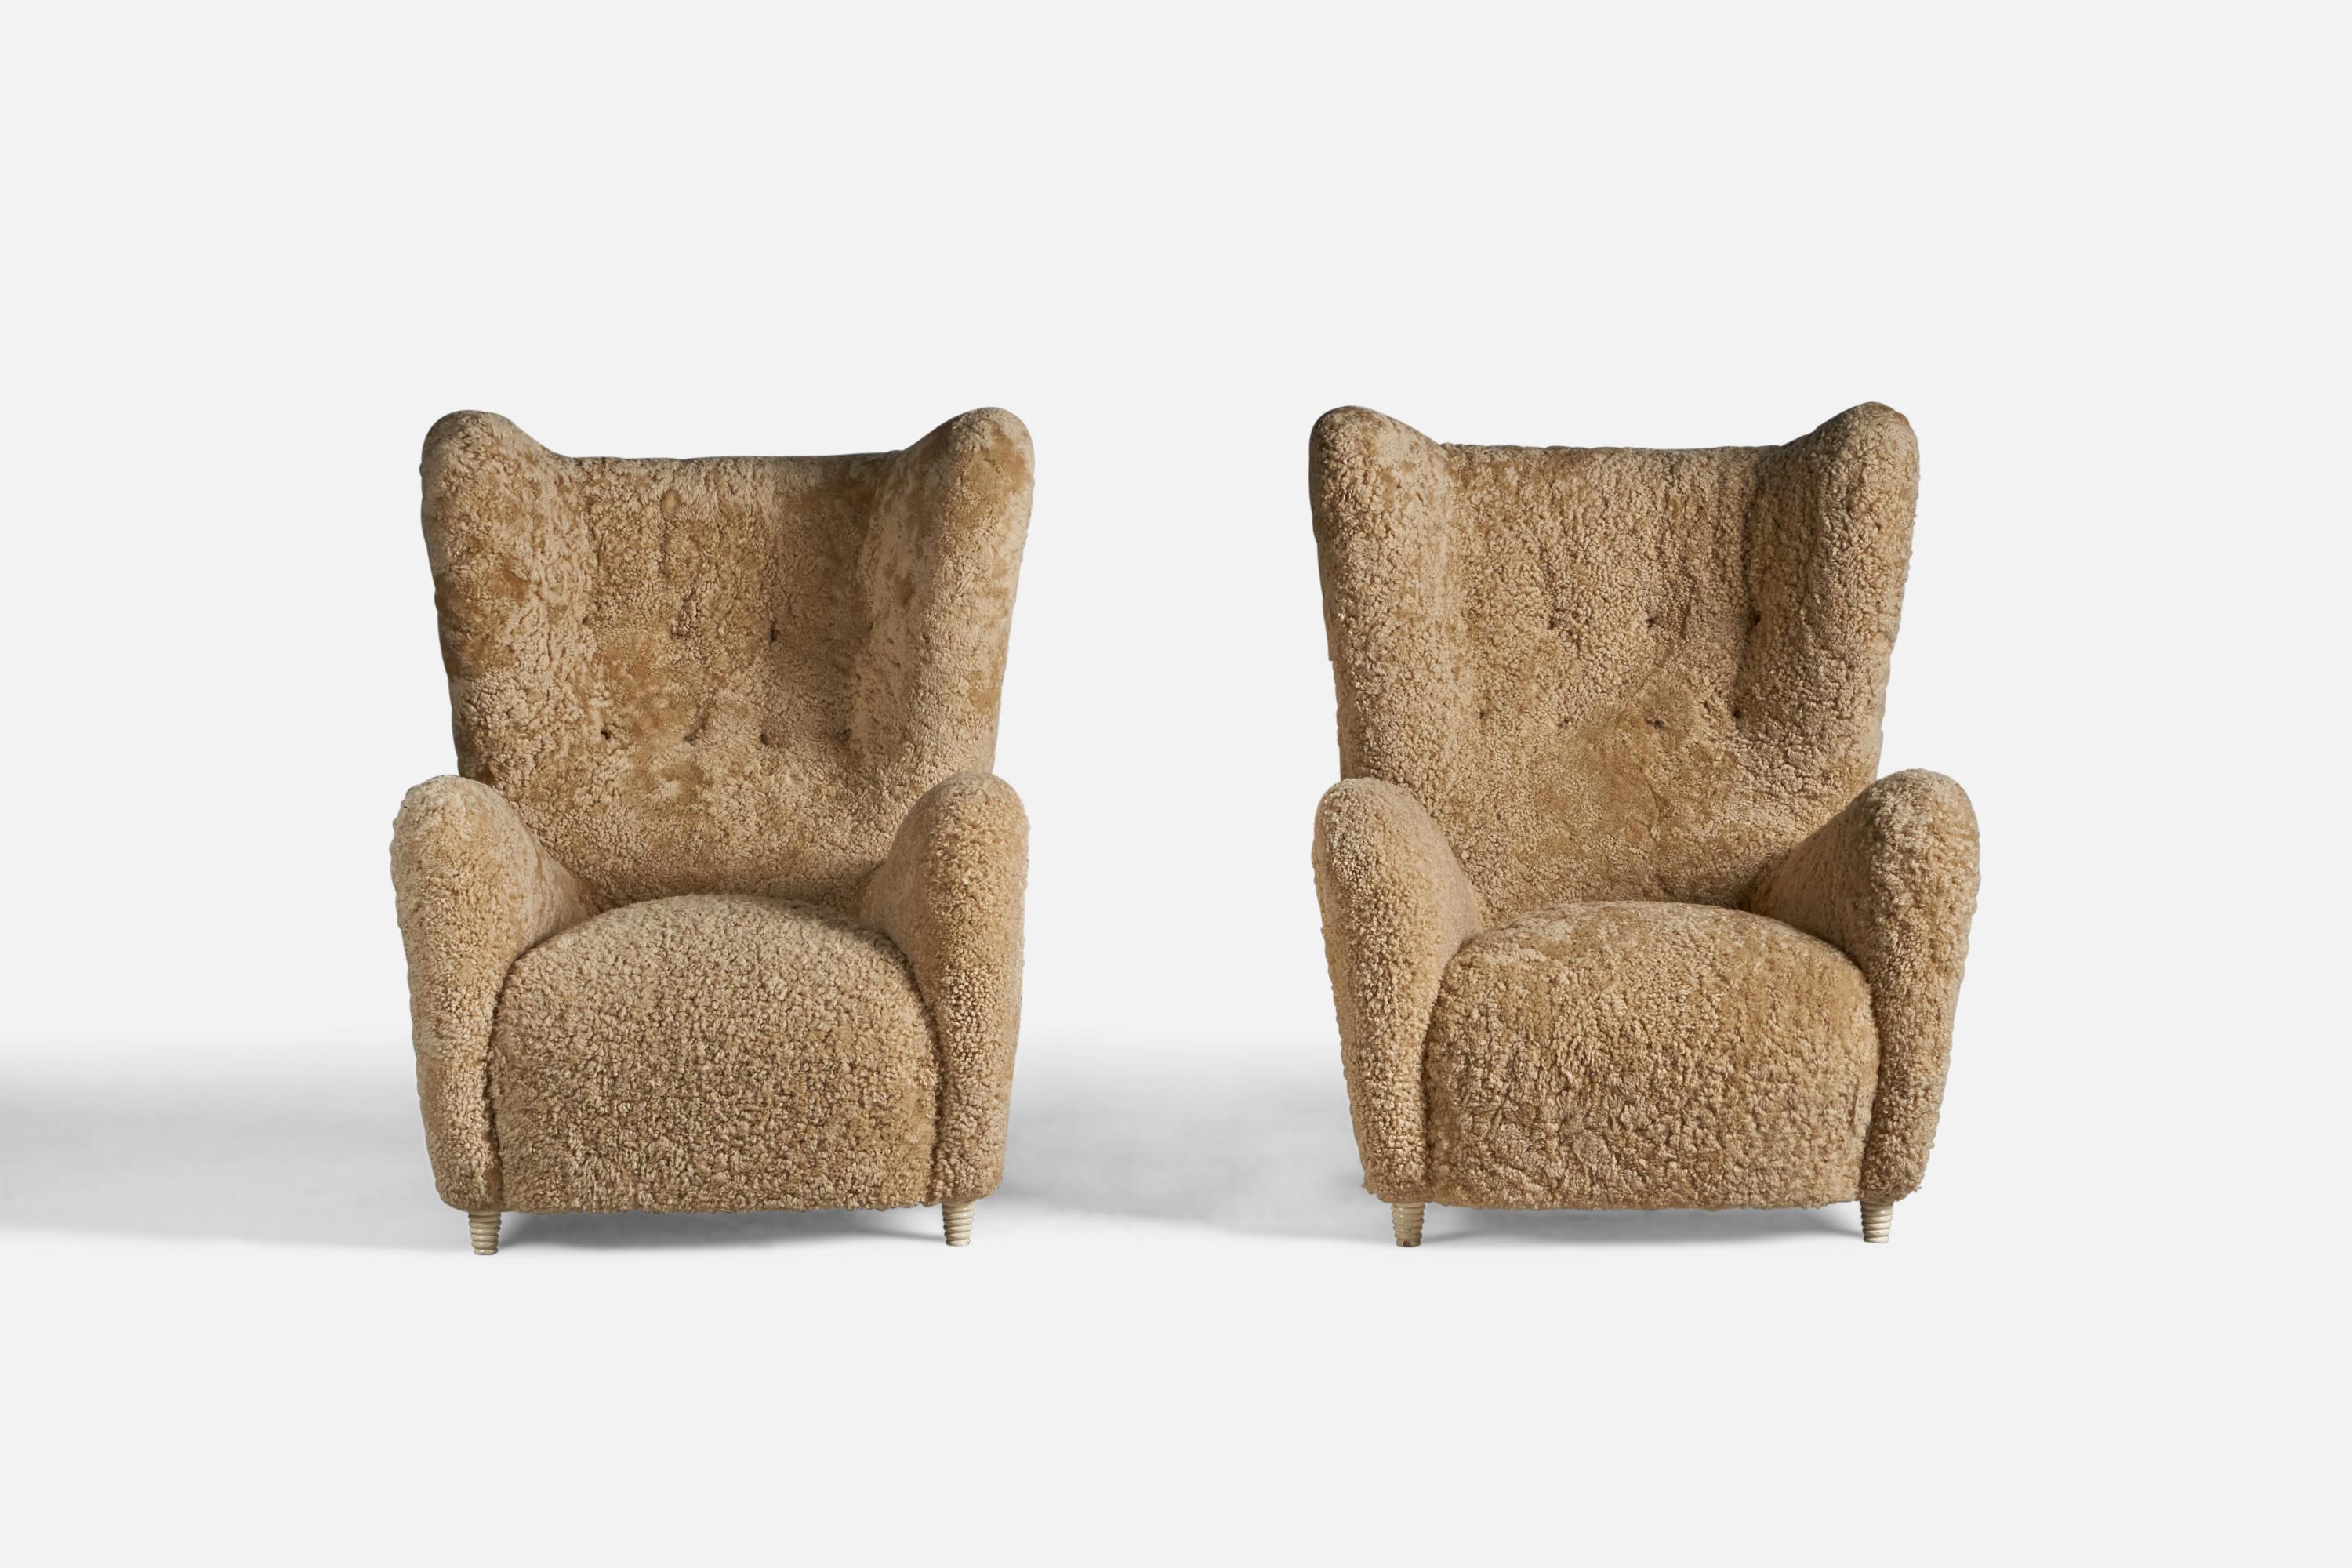 Organic Modern Emilio Sarrachi, Sizeable Lounge Chairs, Shearling, Wood, Italy, 1940s For Sale